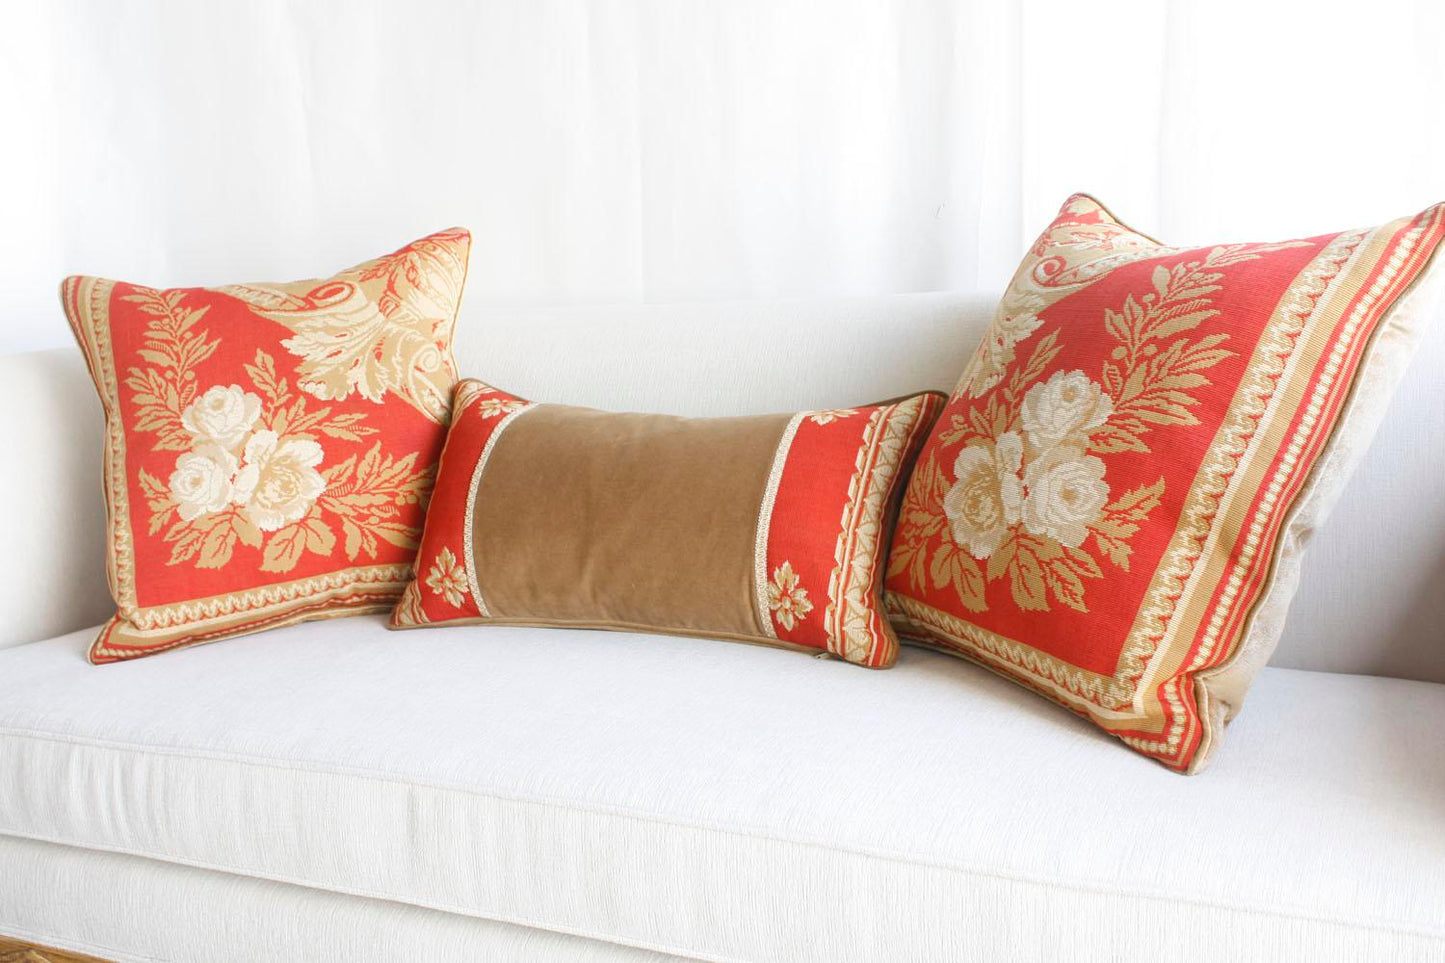 Single Neoclassical-style Pillow